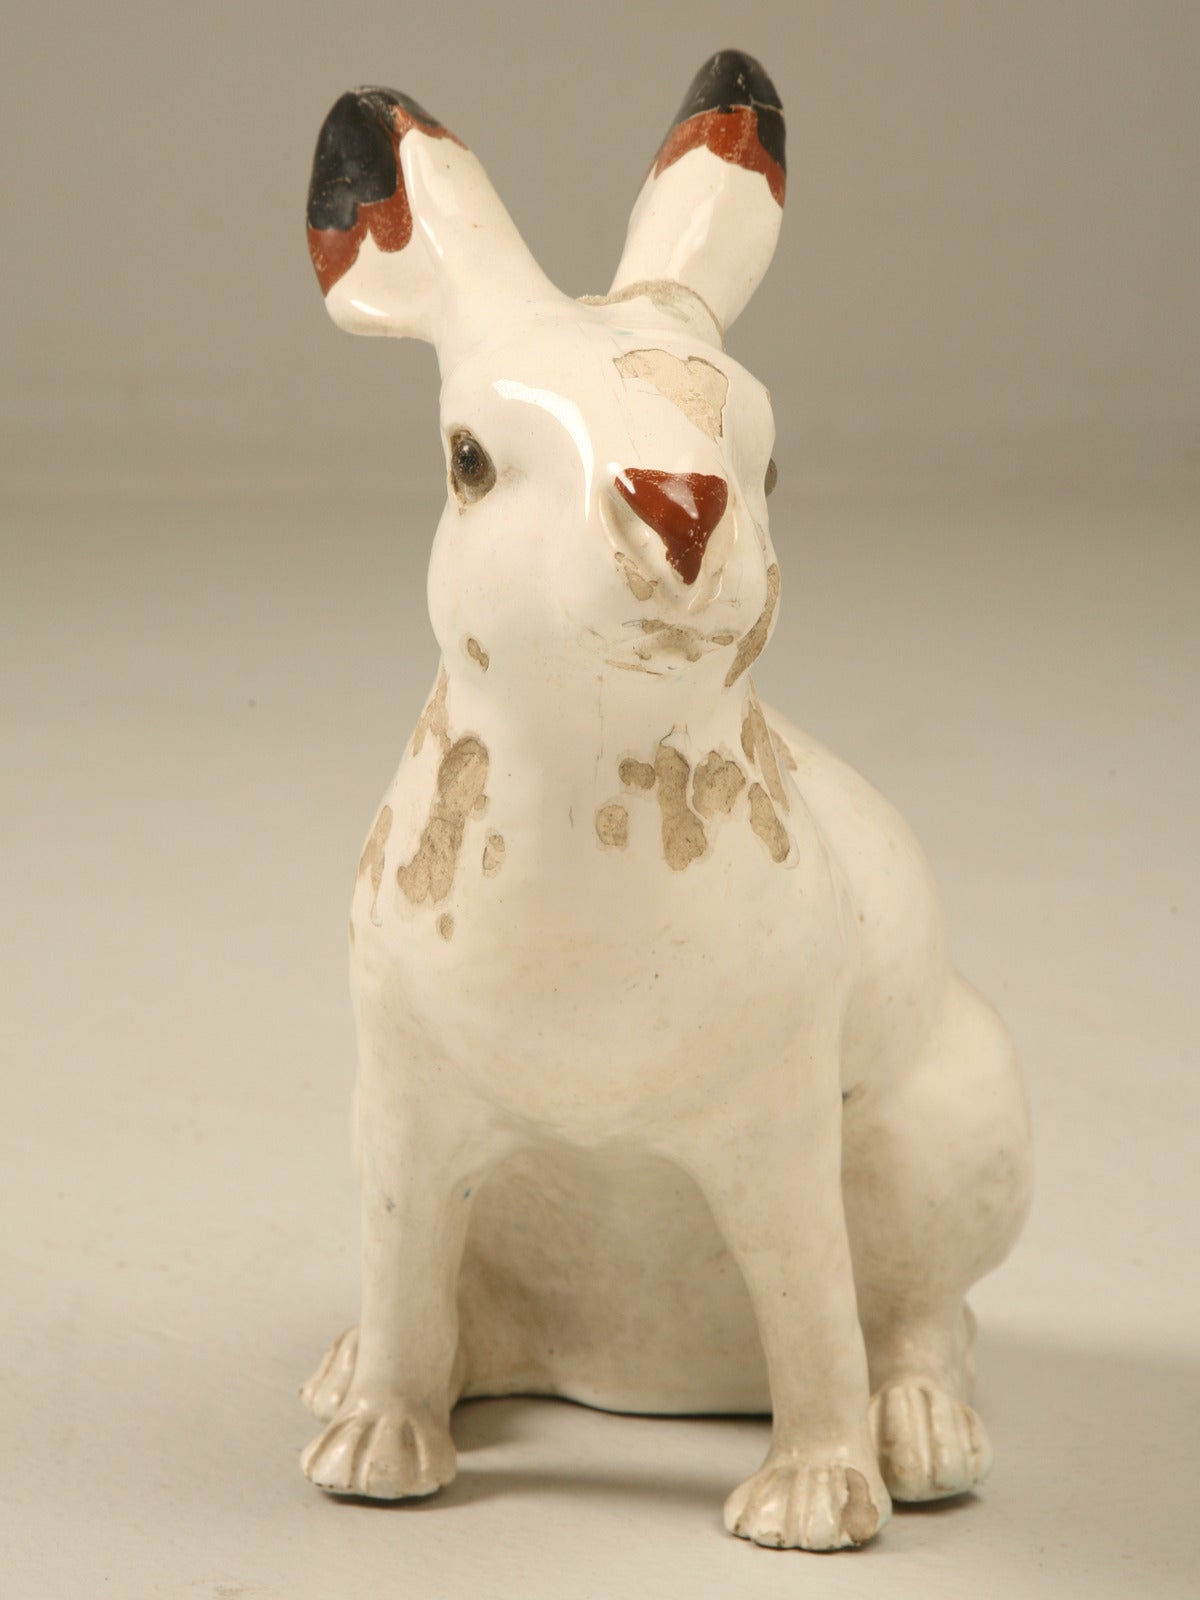 An earthenware rabbit possibly produced by the company; La Poterie du Mesnil, from the Calvados area of Normandy, France. I highly suggest that if you are visiting the Normandy area, that you stop by their factory, because they are still making by